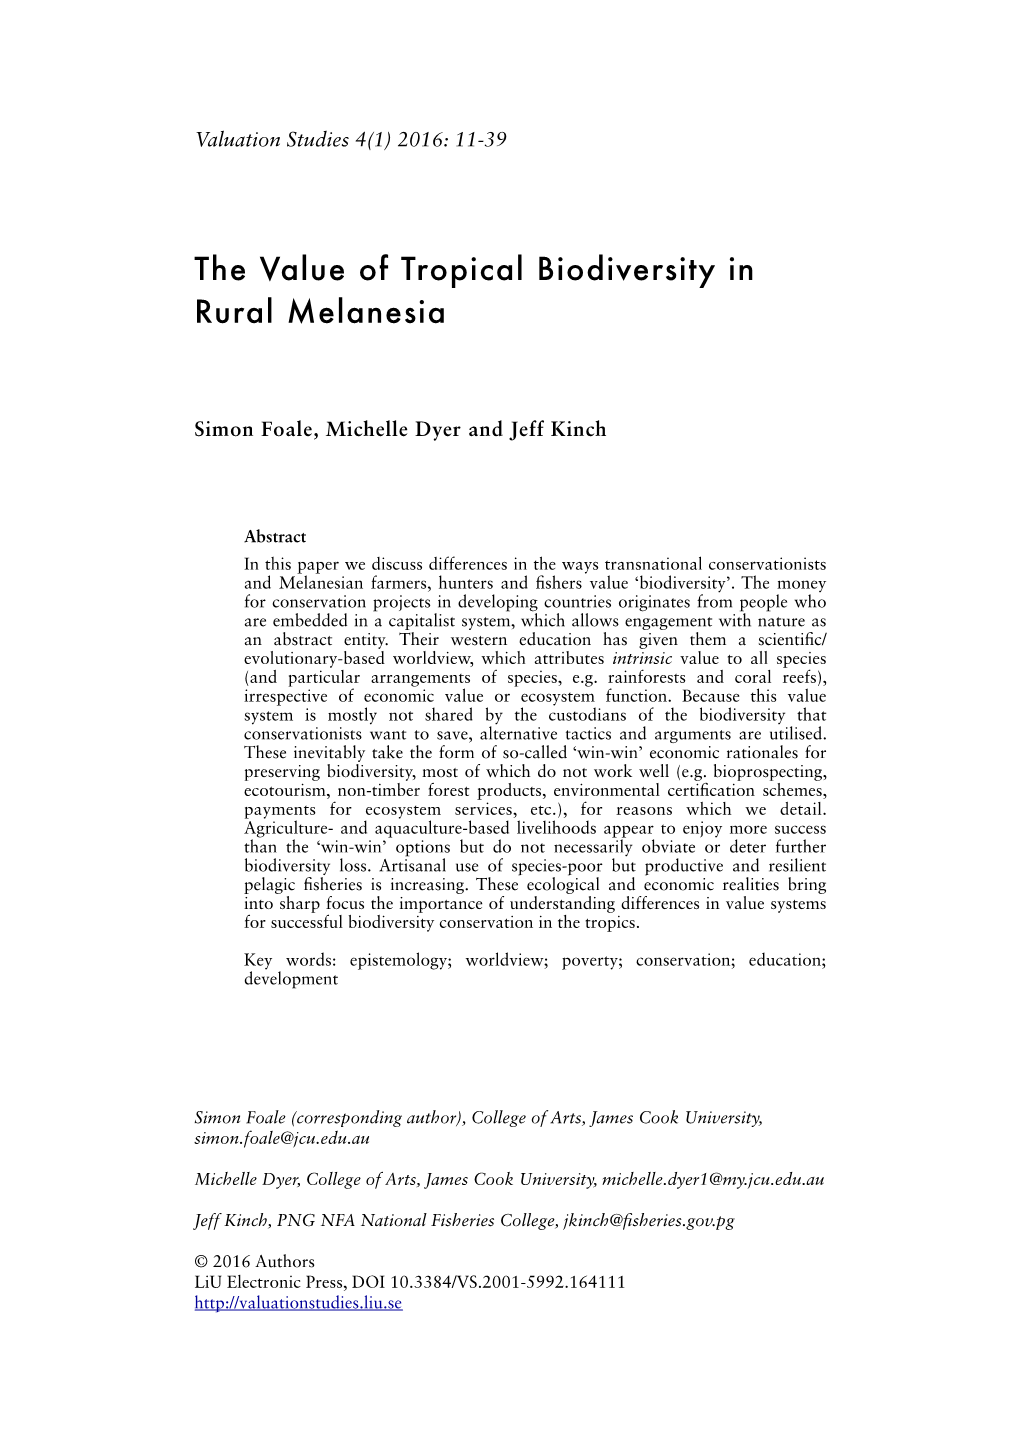 The Value of Tropical Biodiversity in Rural Melanesia